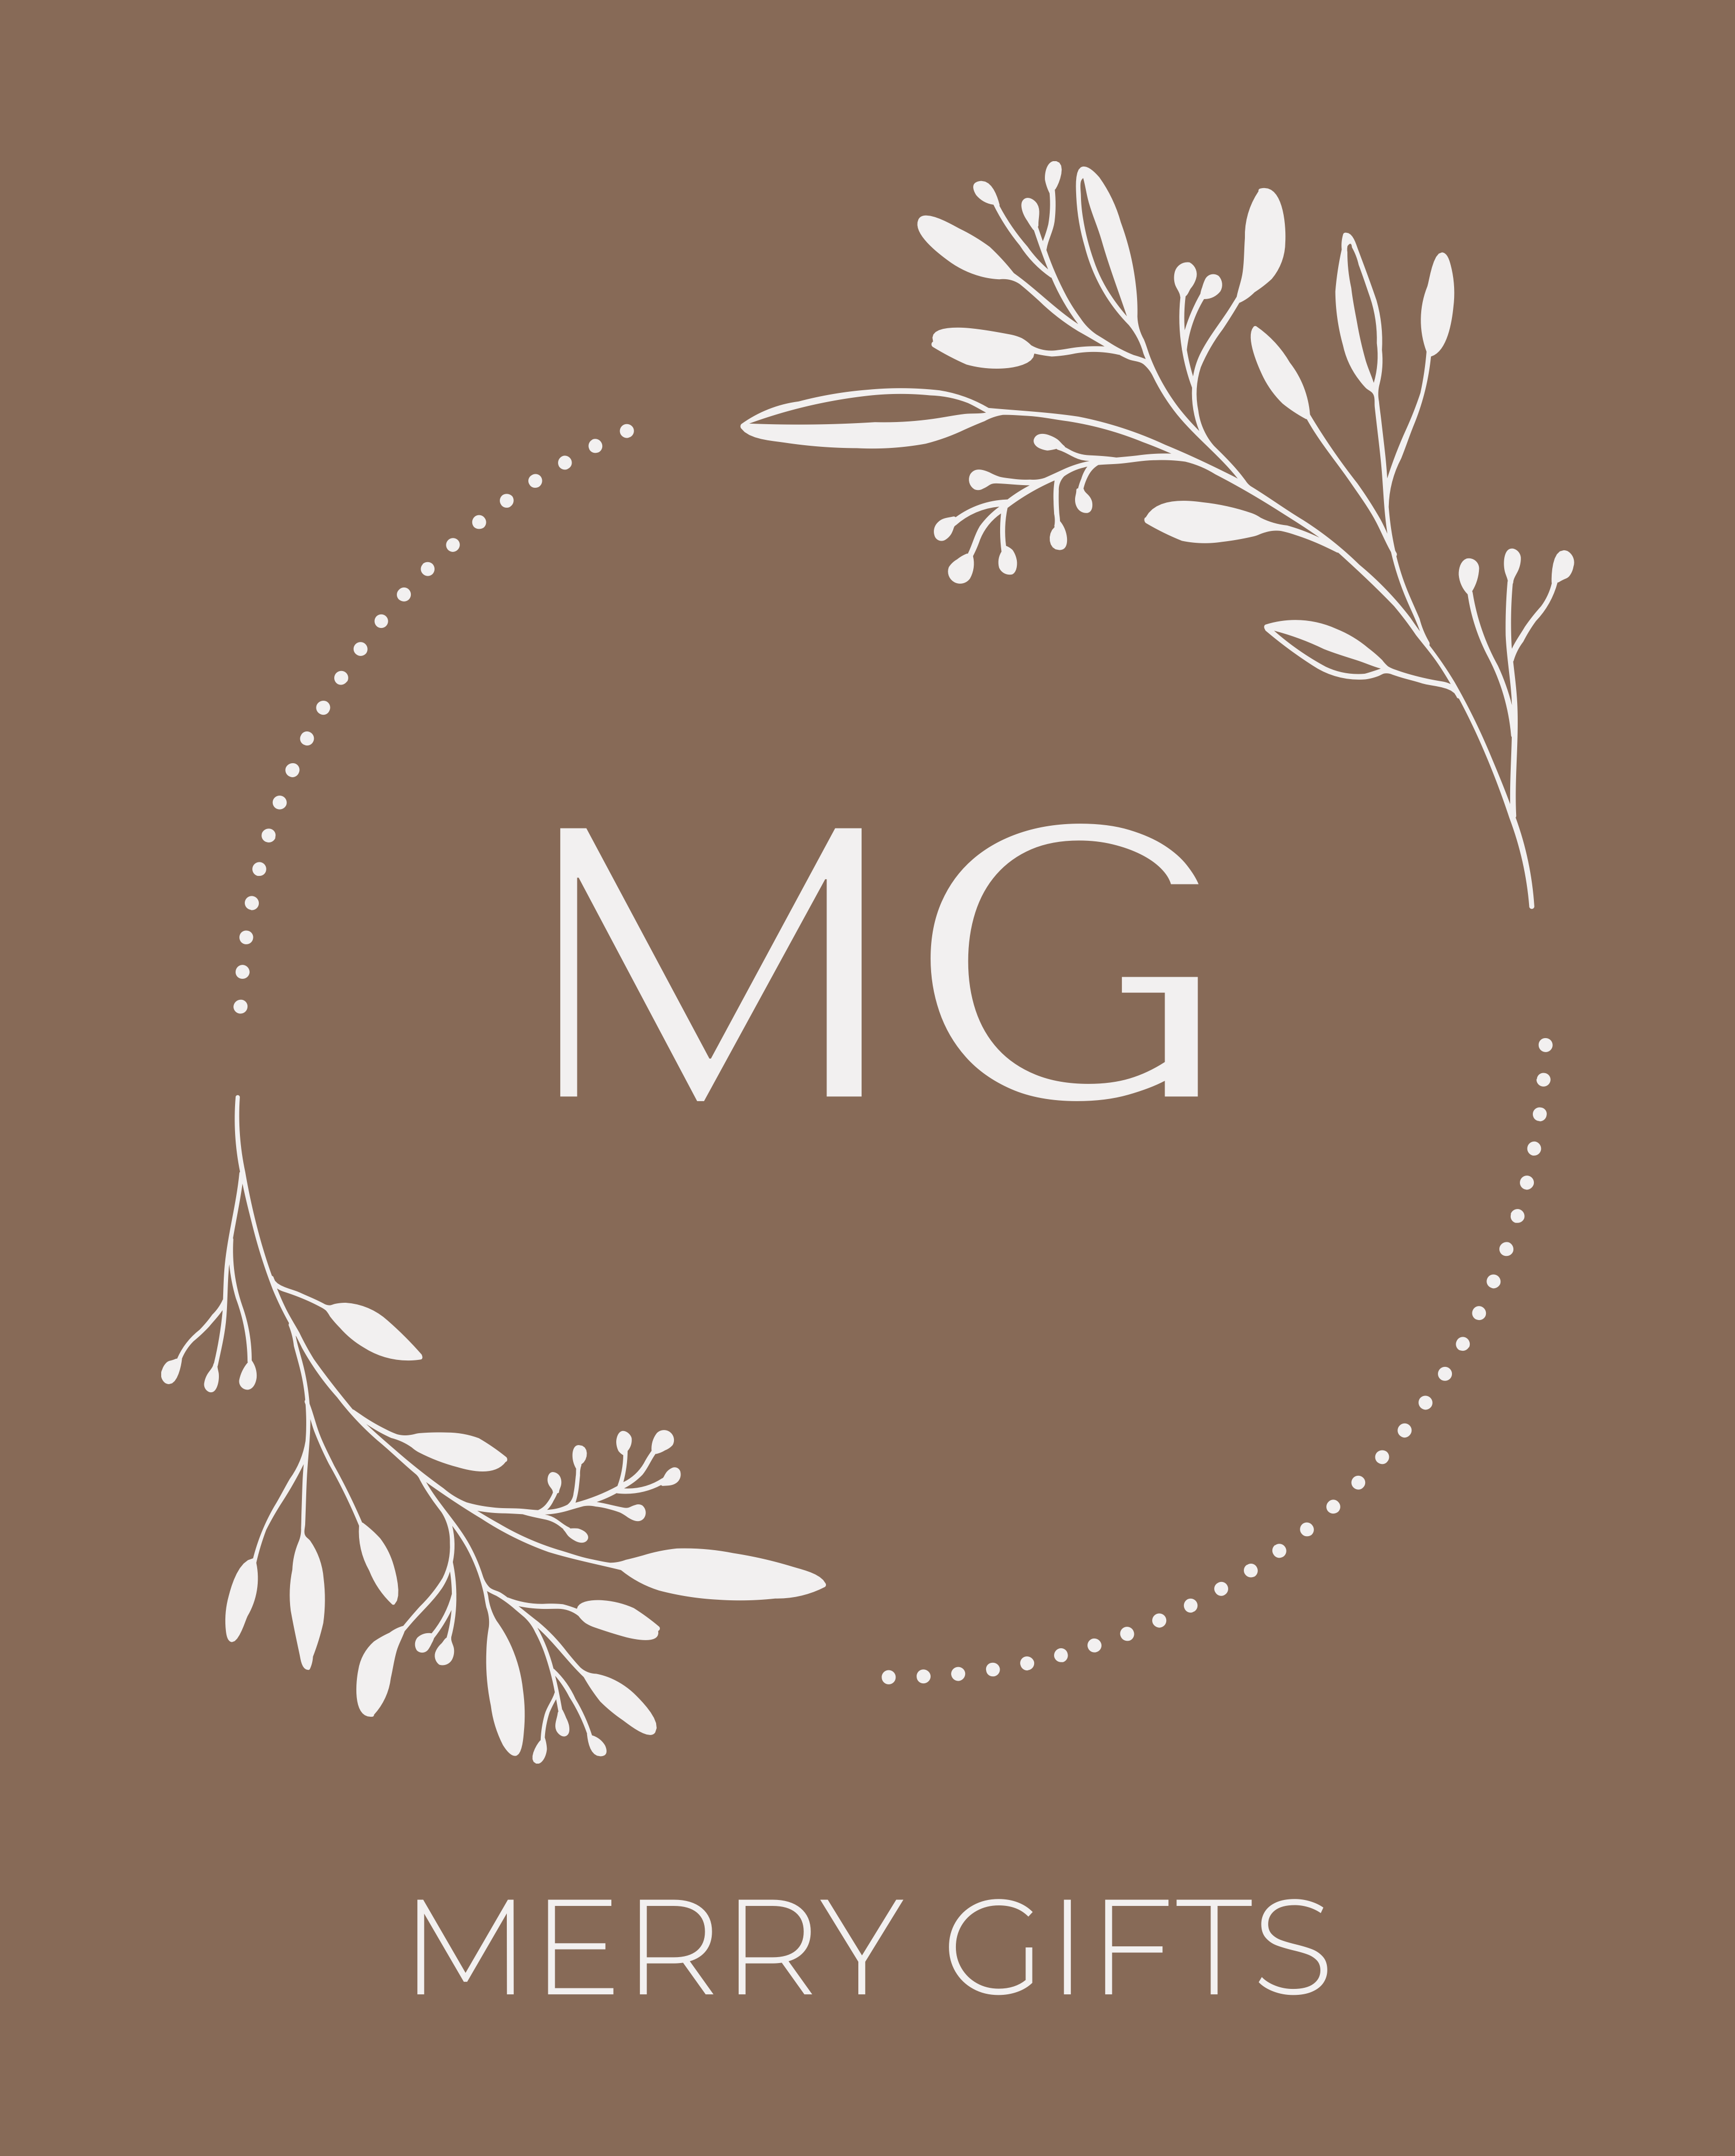 Merry Gifts